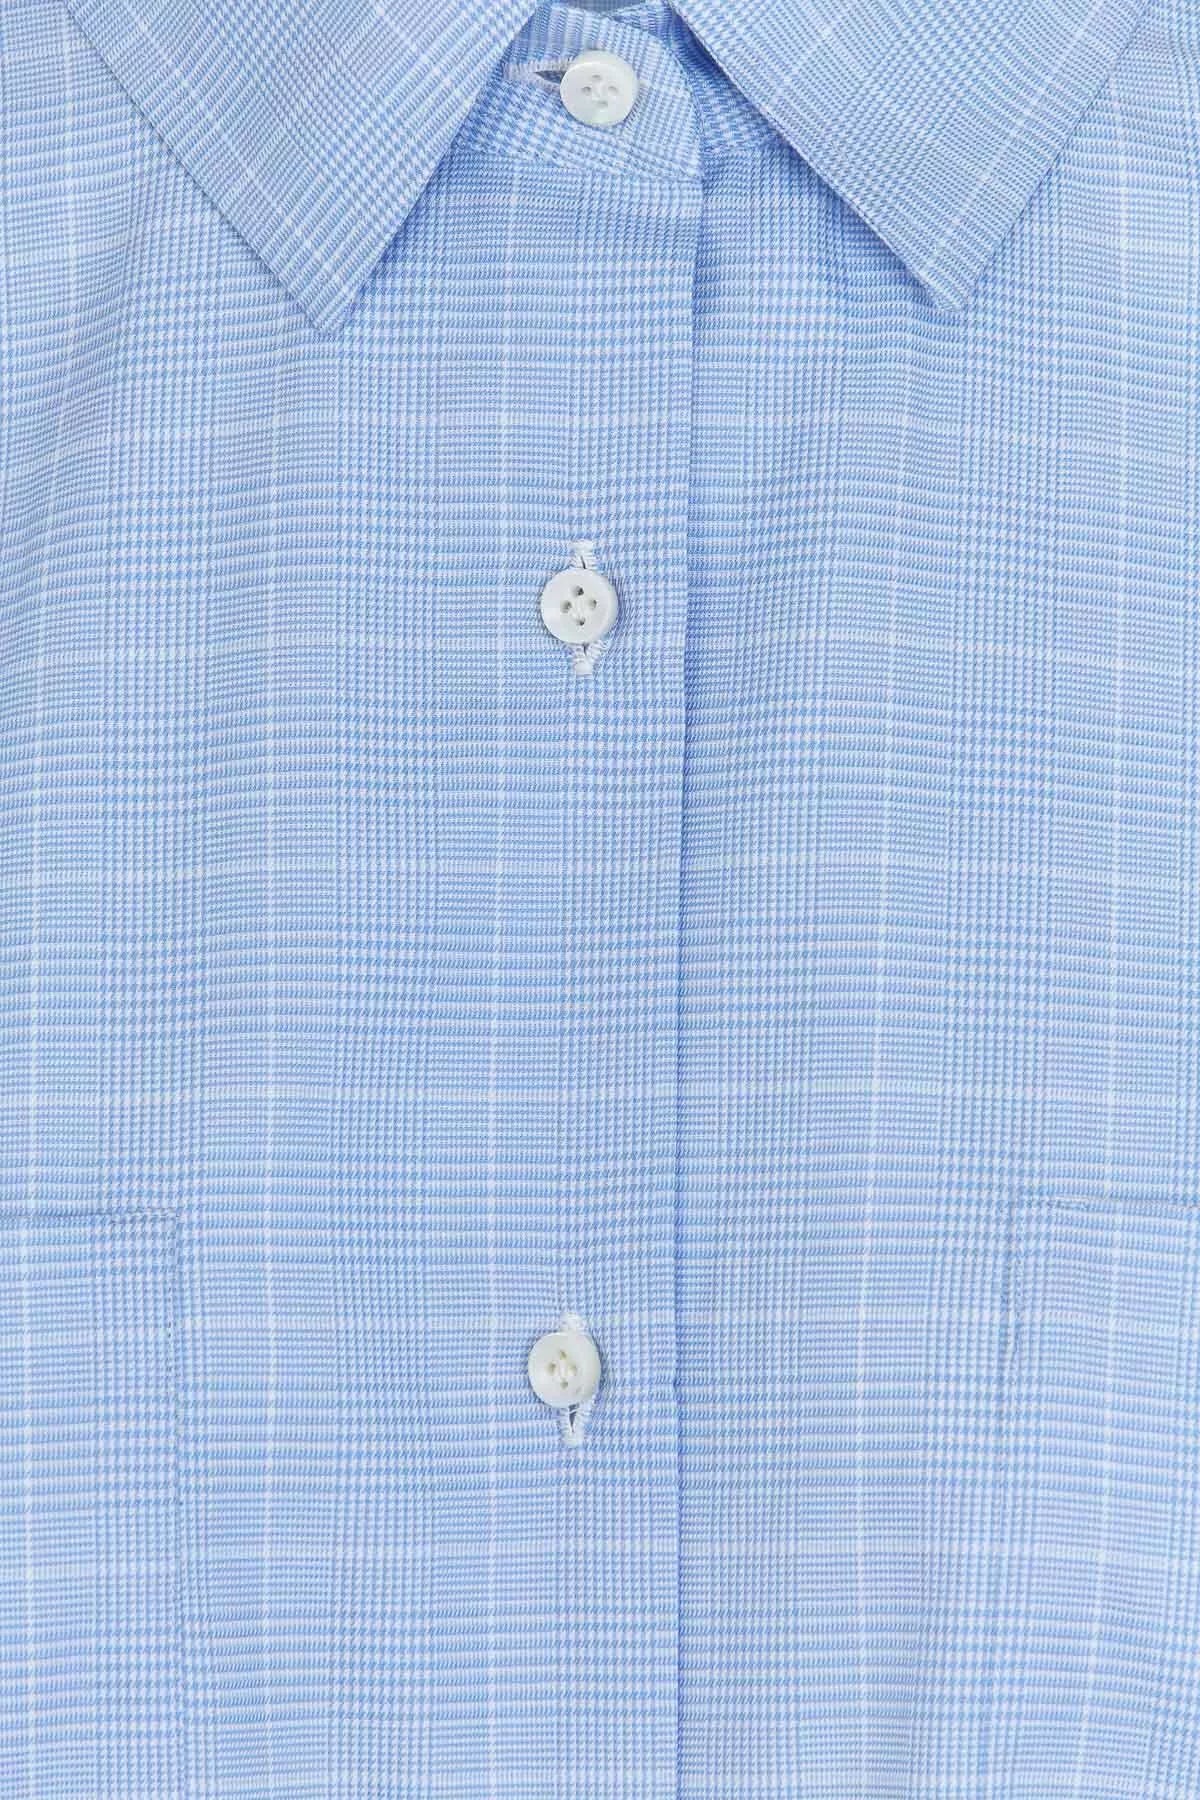 Giuliva-Heritage-The-Carla-Shirt_Cotton-Sky-Blue-and-White-Check-Amarees